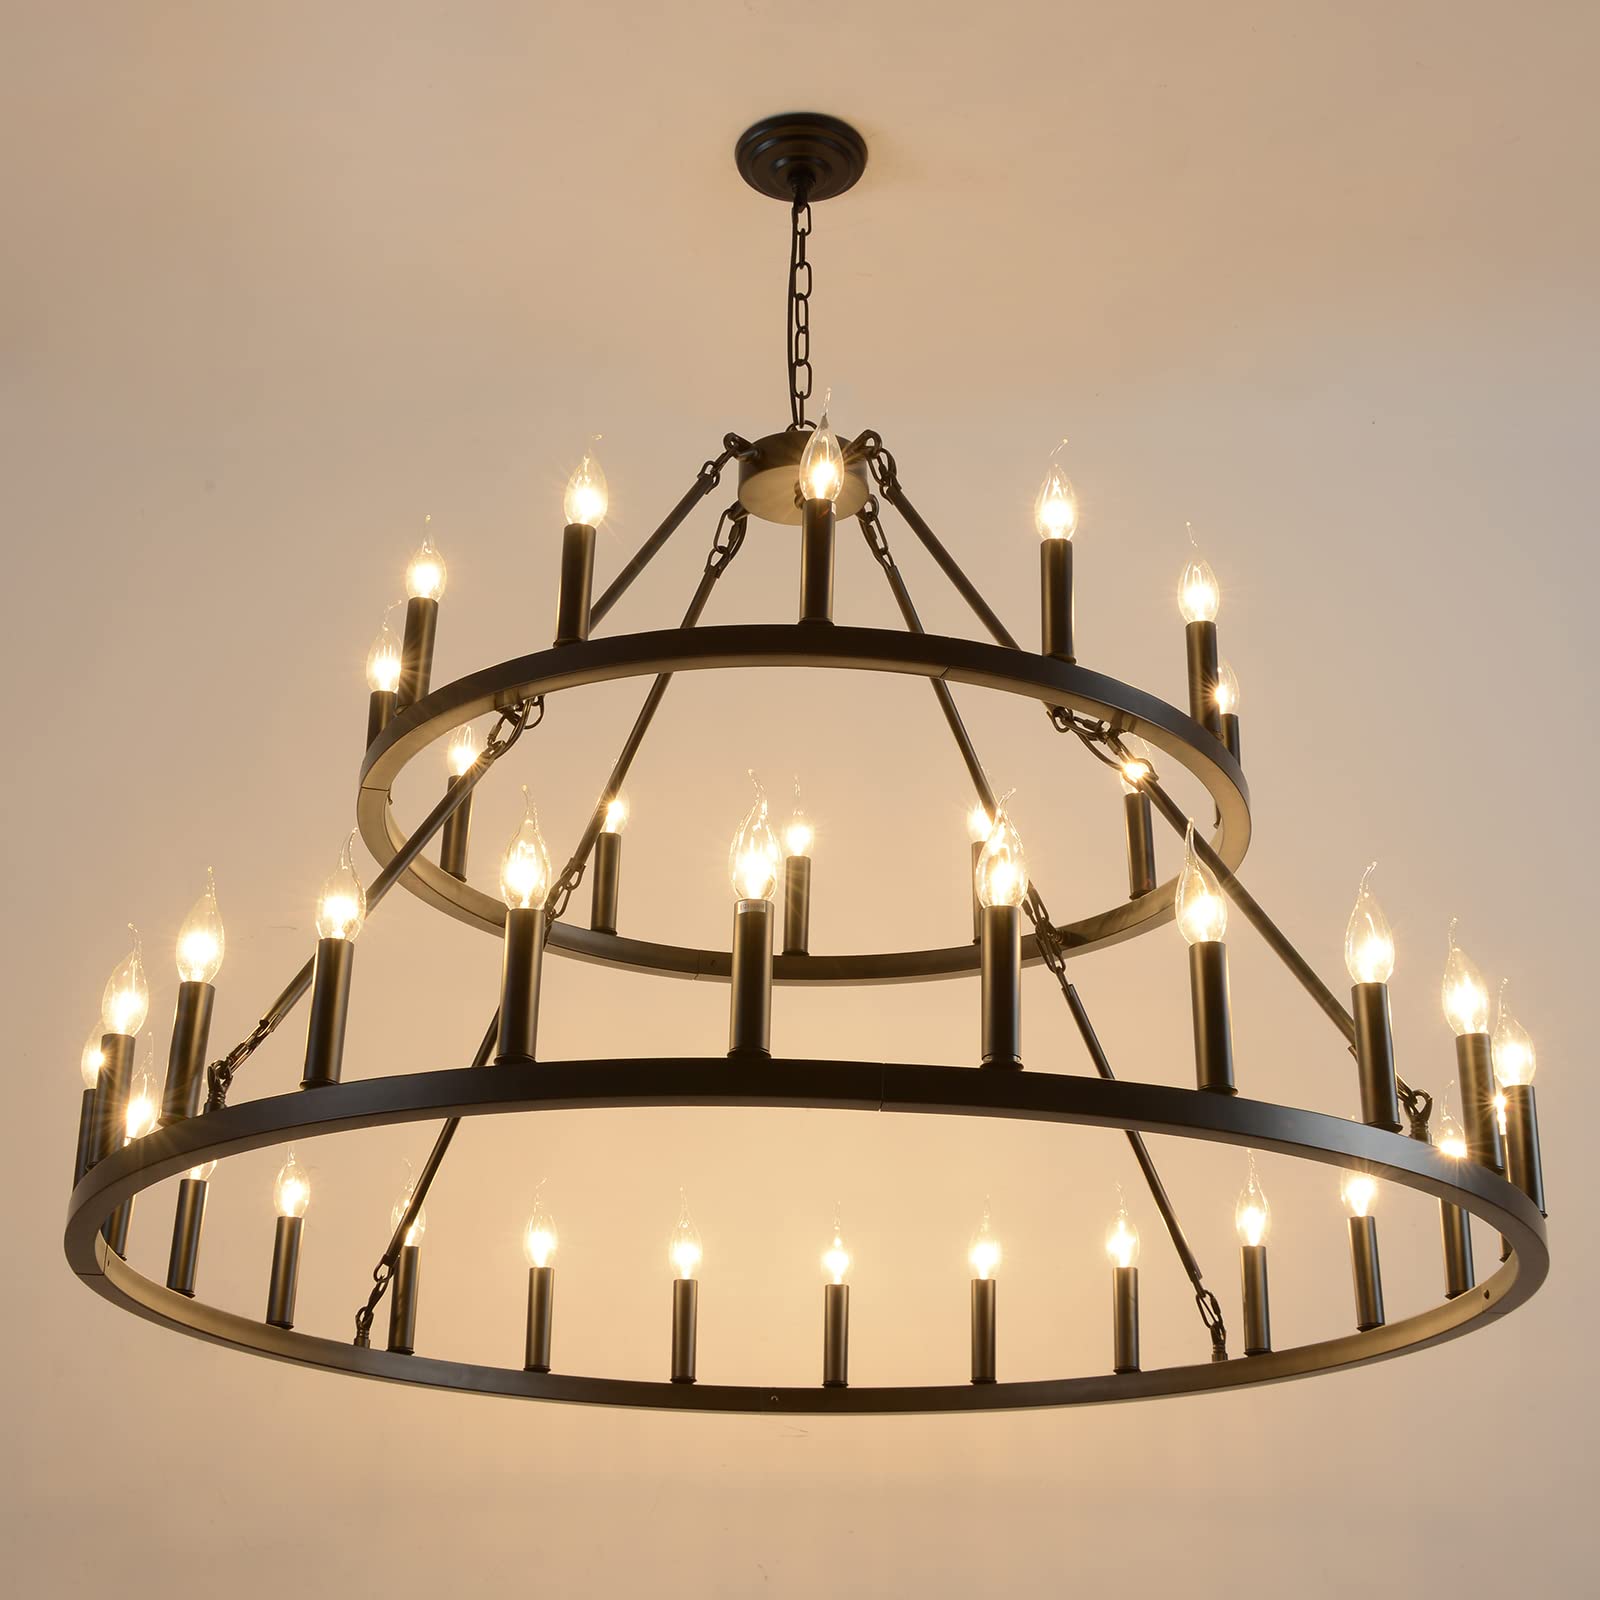 WOGON WEEL Wagon Wheel Chandelier 2 Tier 36-Light 48-inch, Black Farmhouse Industrial Chandelier Rustic Candle Pendant Light Extra Large for High Ceilings, Living Room Foyer